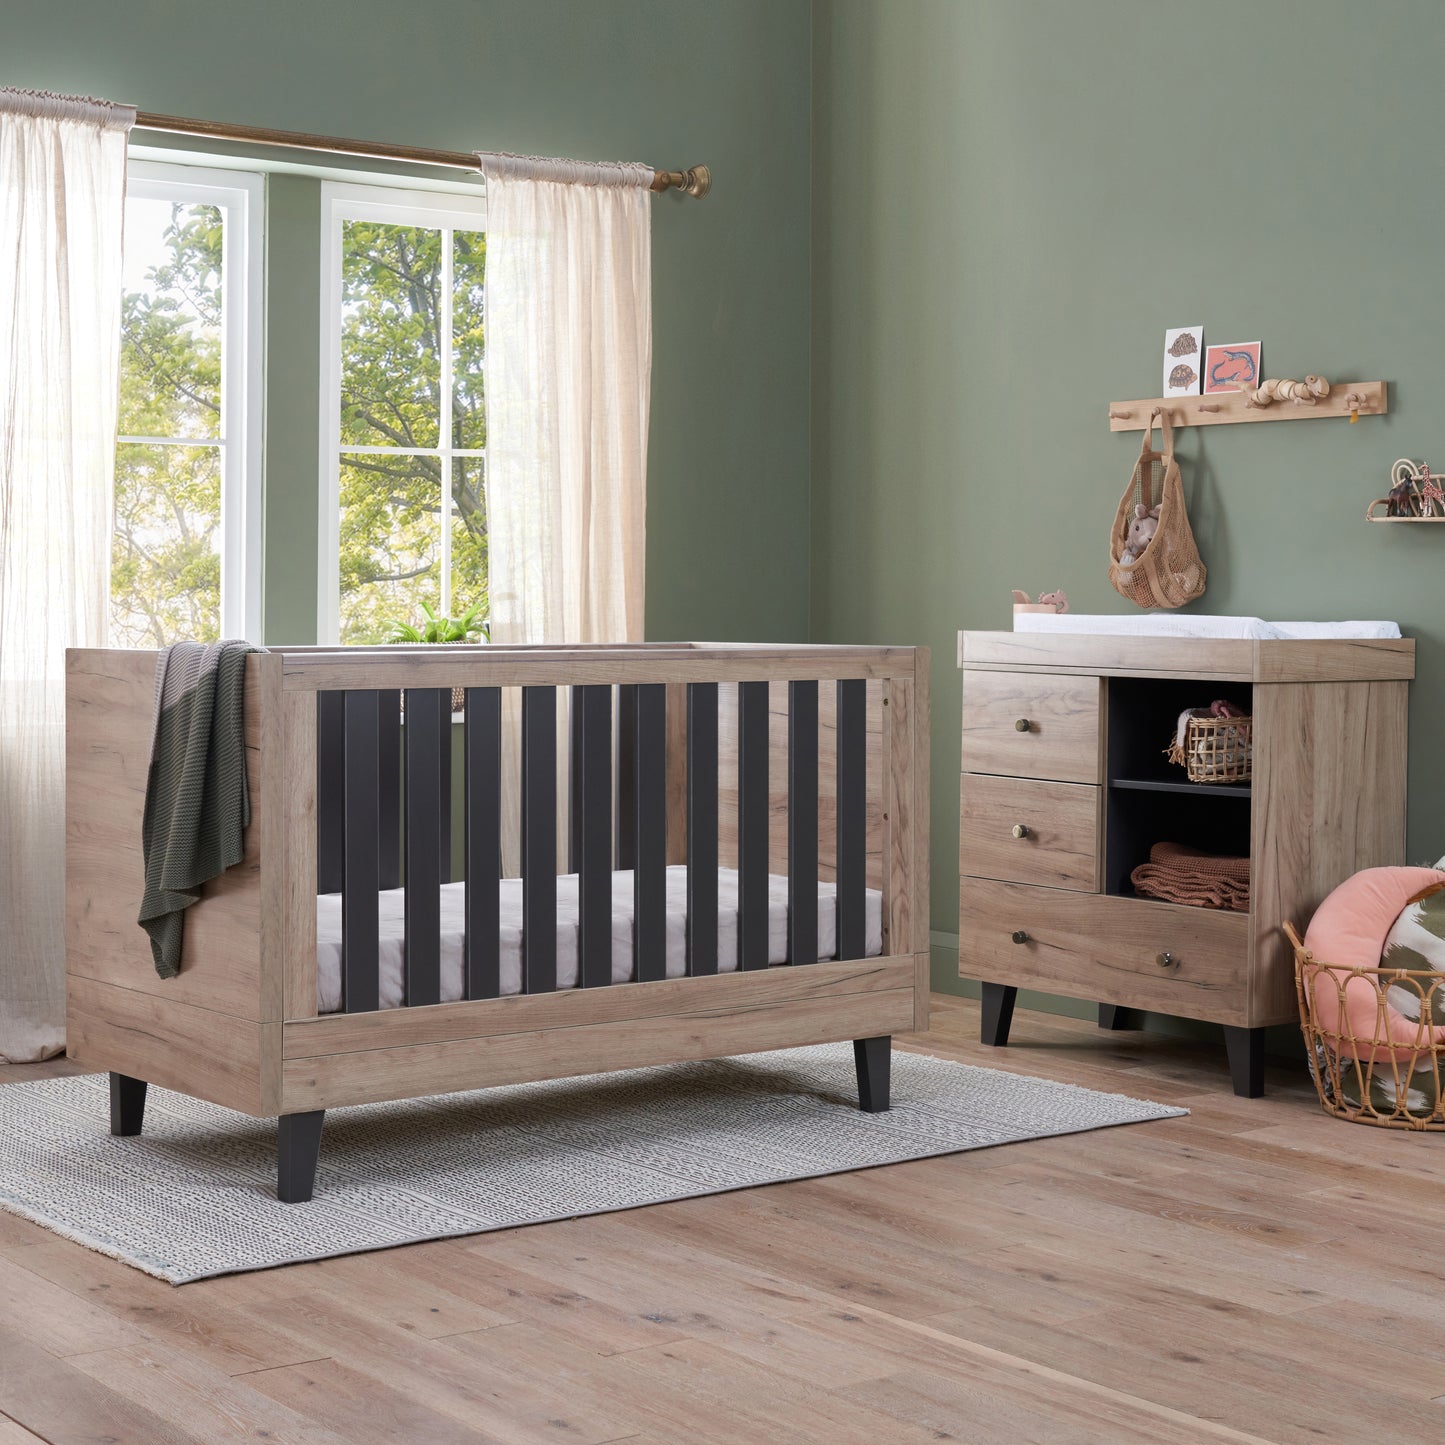 Tutti Bambini Como 2 Piece Set with Cot Bed and Dresser